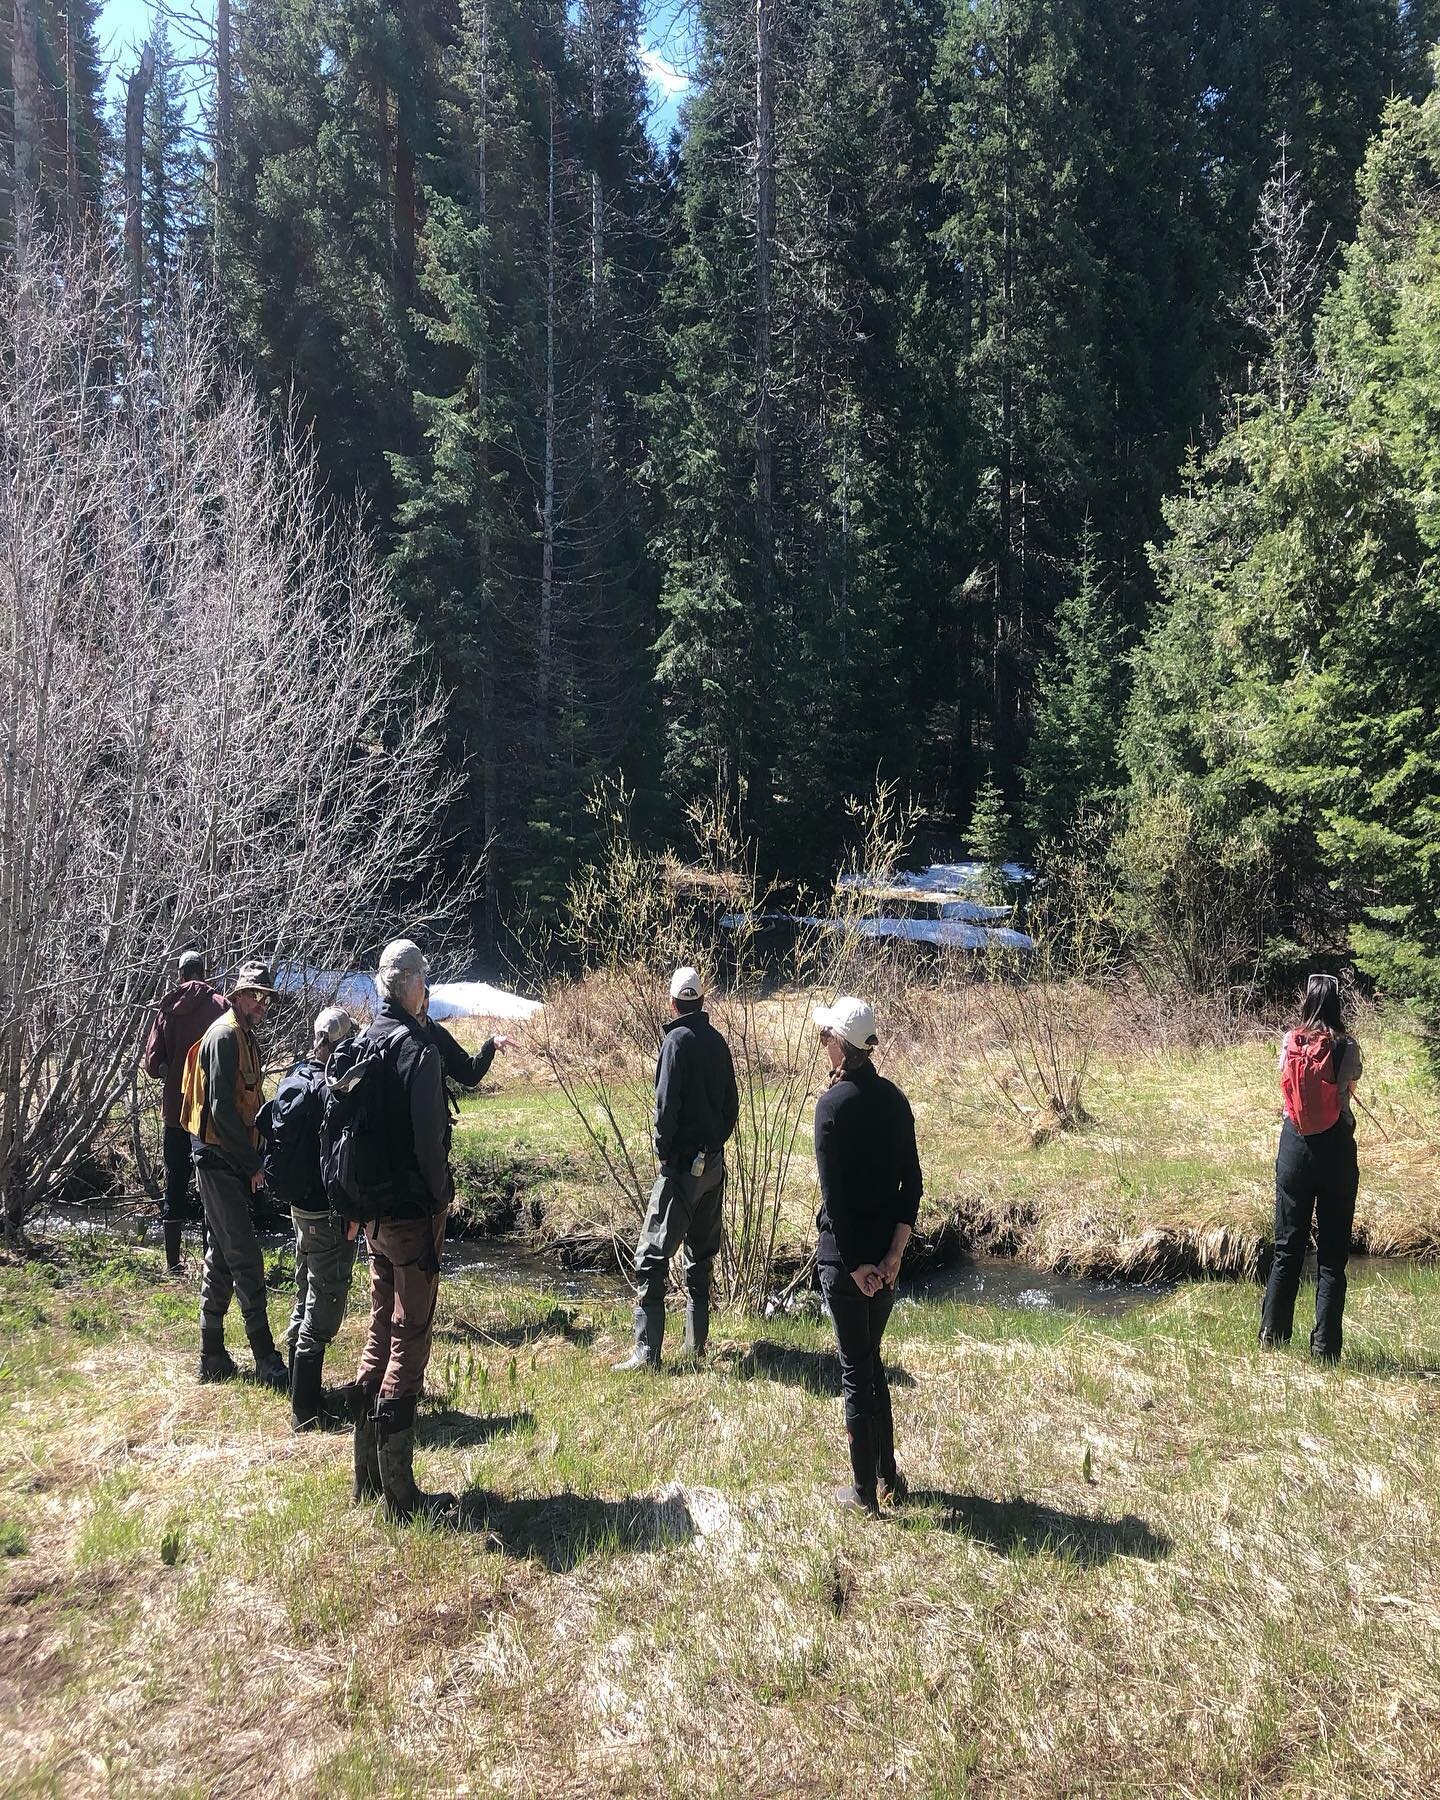 We&rsquo;re lookin go back, but mainly looking forward&hellip;and upstream!

As we spent the day yesterday with partners from the Medford BLM scoping out tributaries to Latgawa Creek for more #lowtechprocessbasedrestoration aka &lsquo;beaver-based&rs